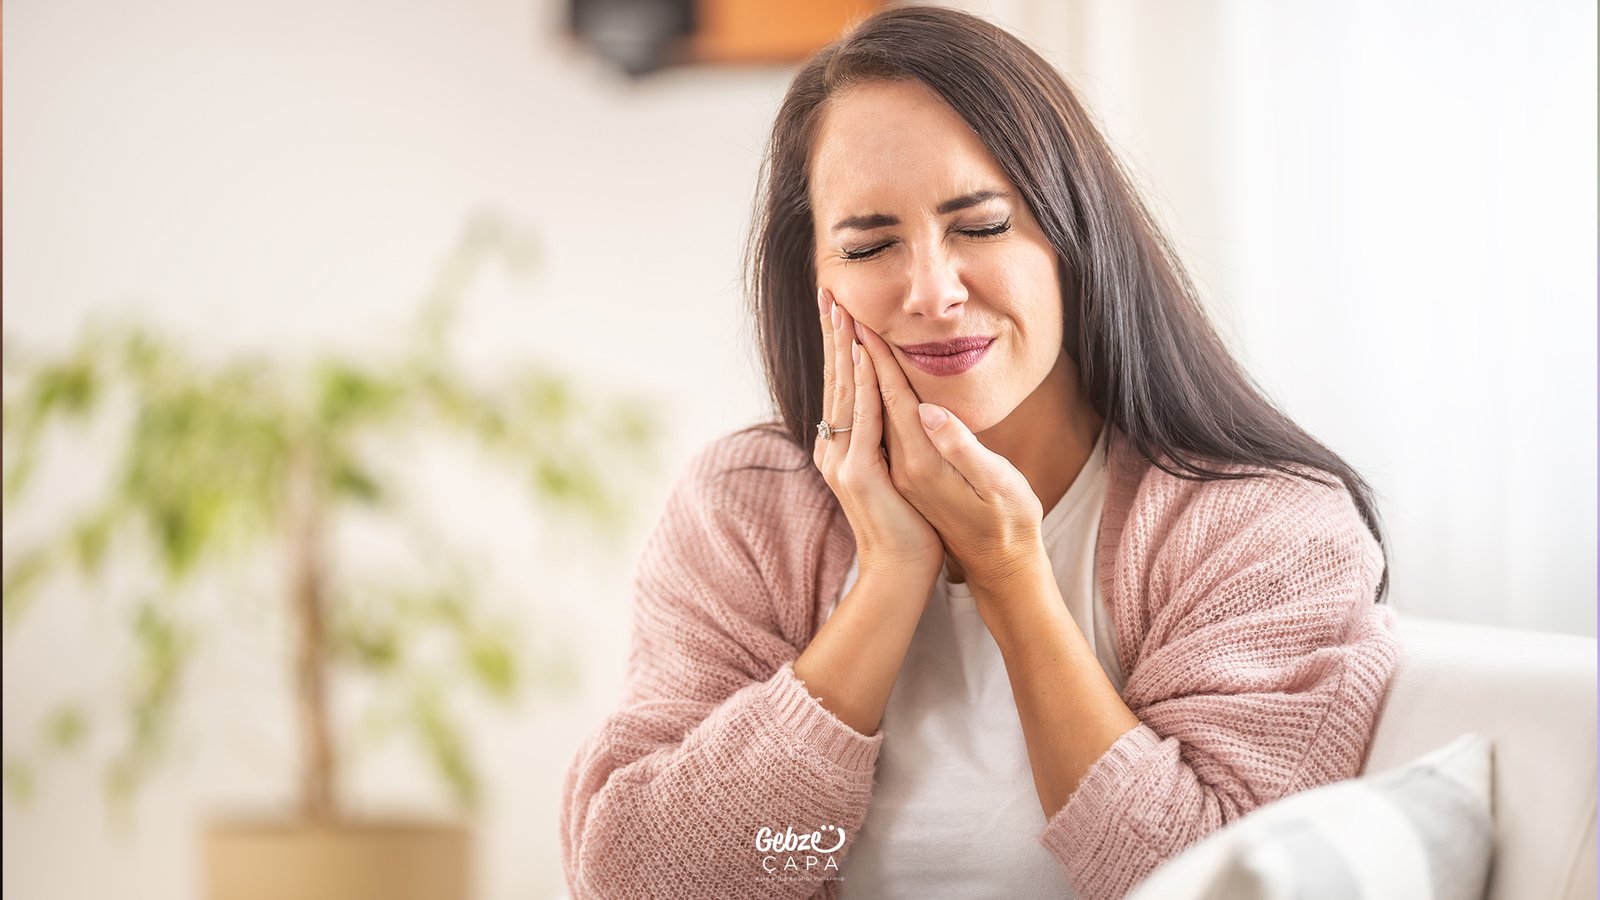 Pregnancy-related toothache